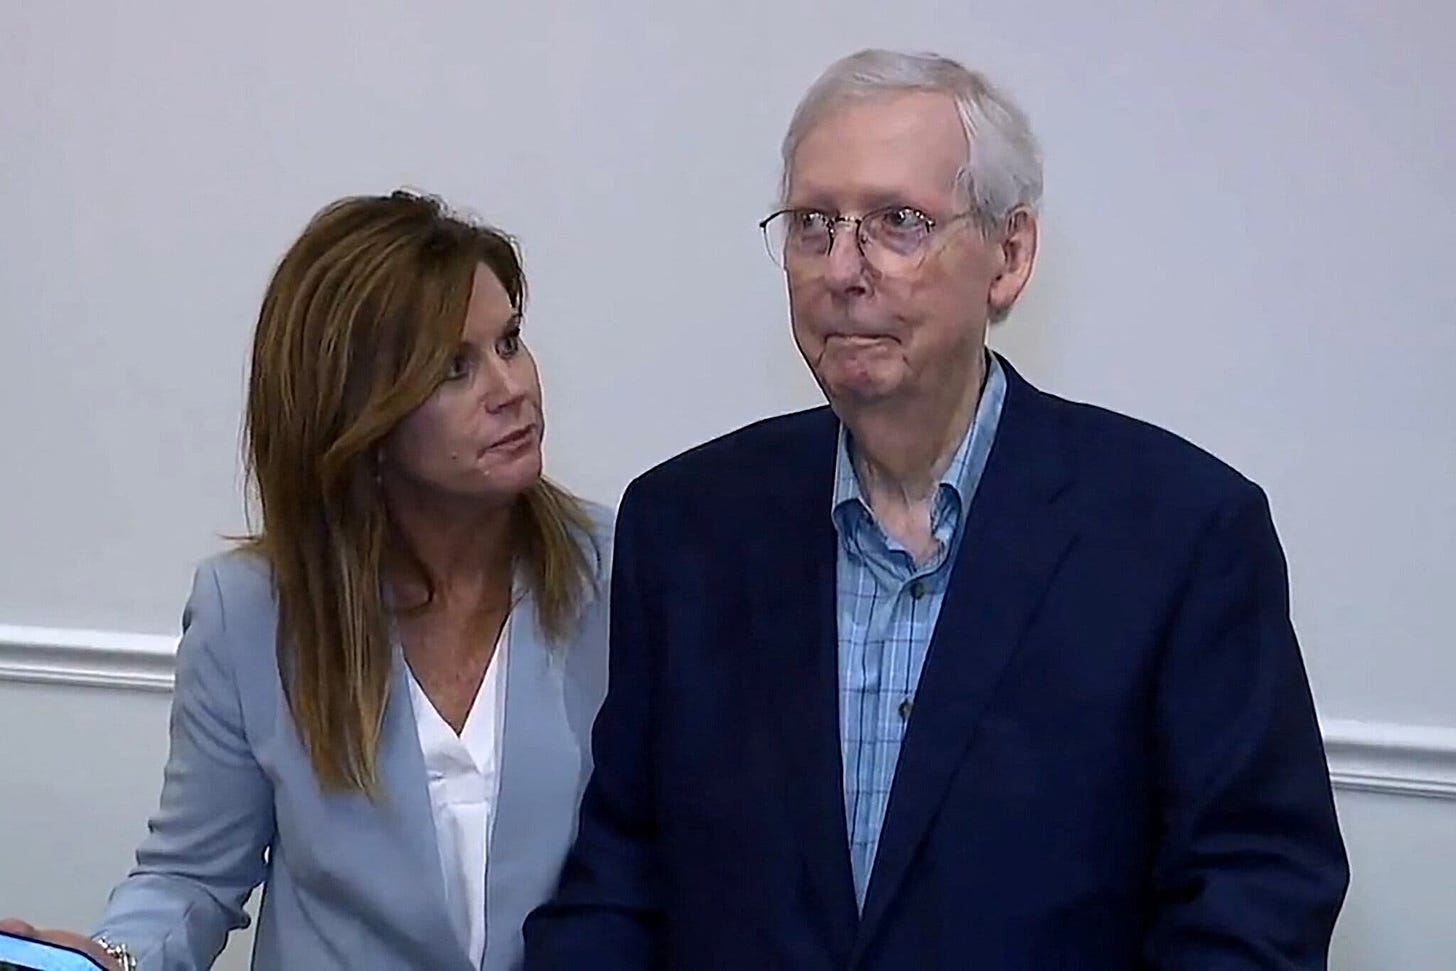 Mitch McConnell May Be Experiencing Small Seizures, Doctors Suggest ...